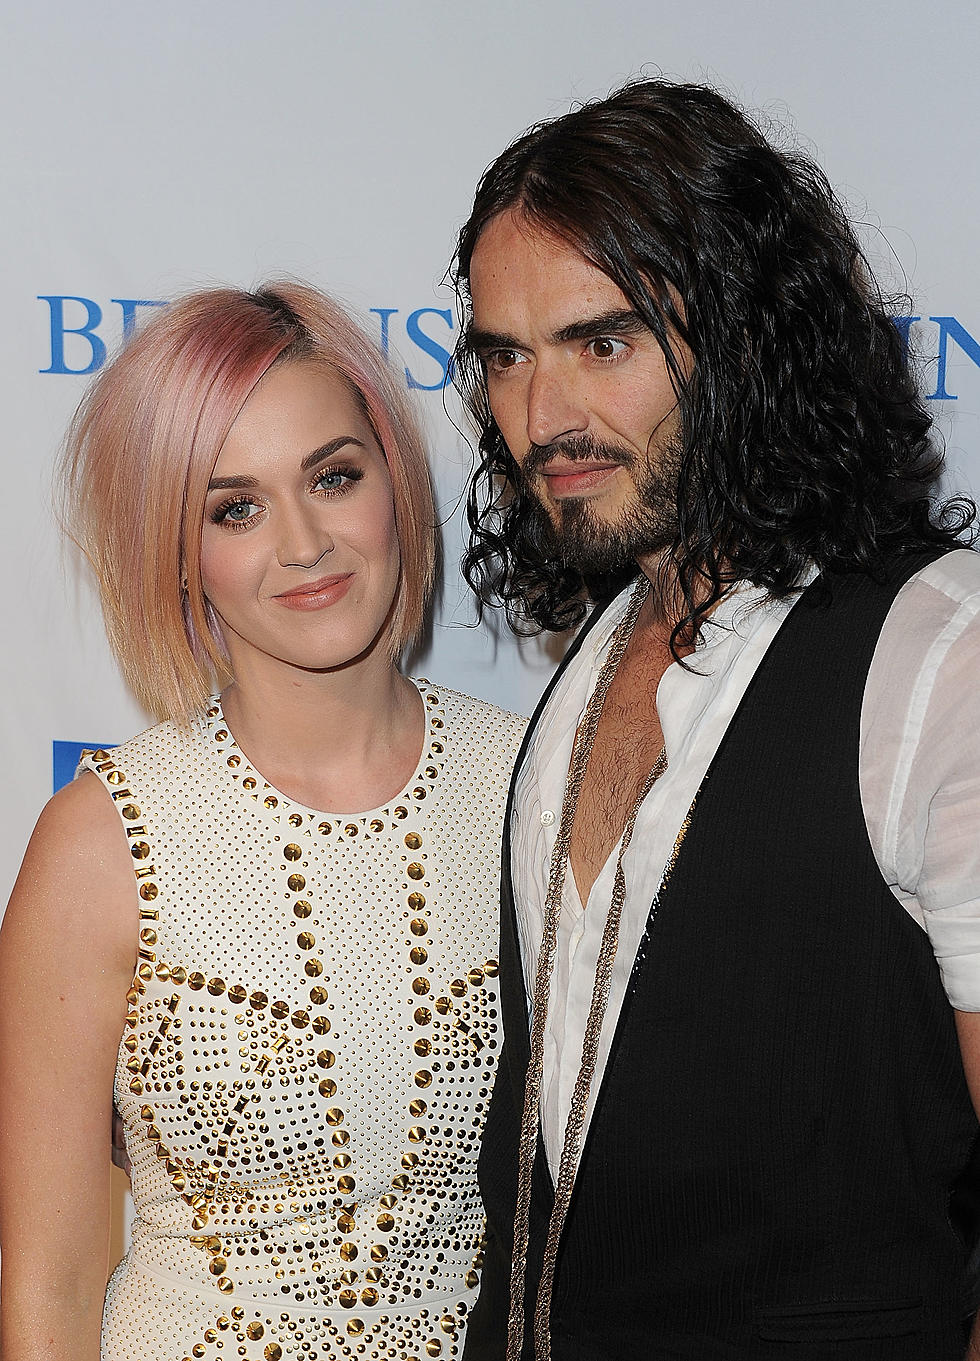 Russell And Katy’s Amicable Split